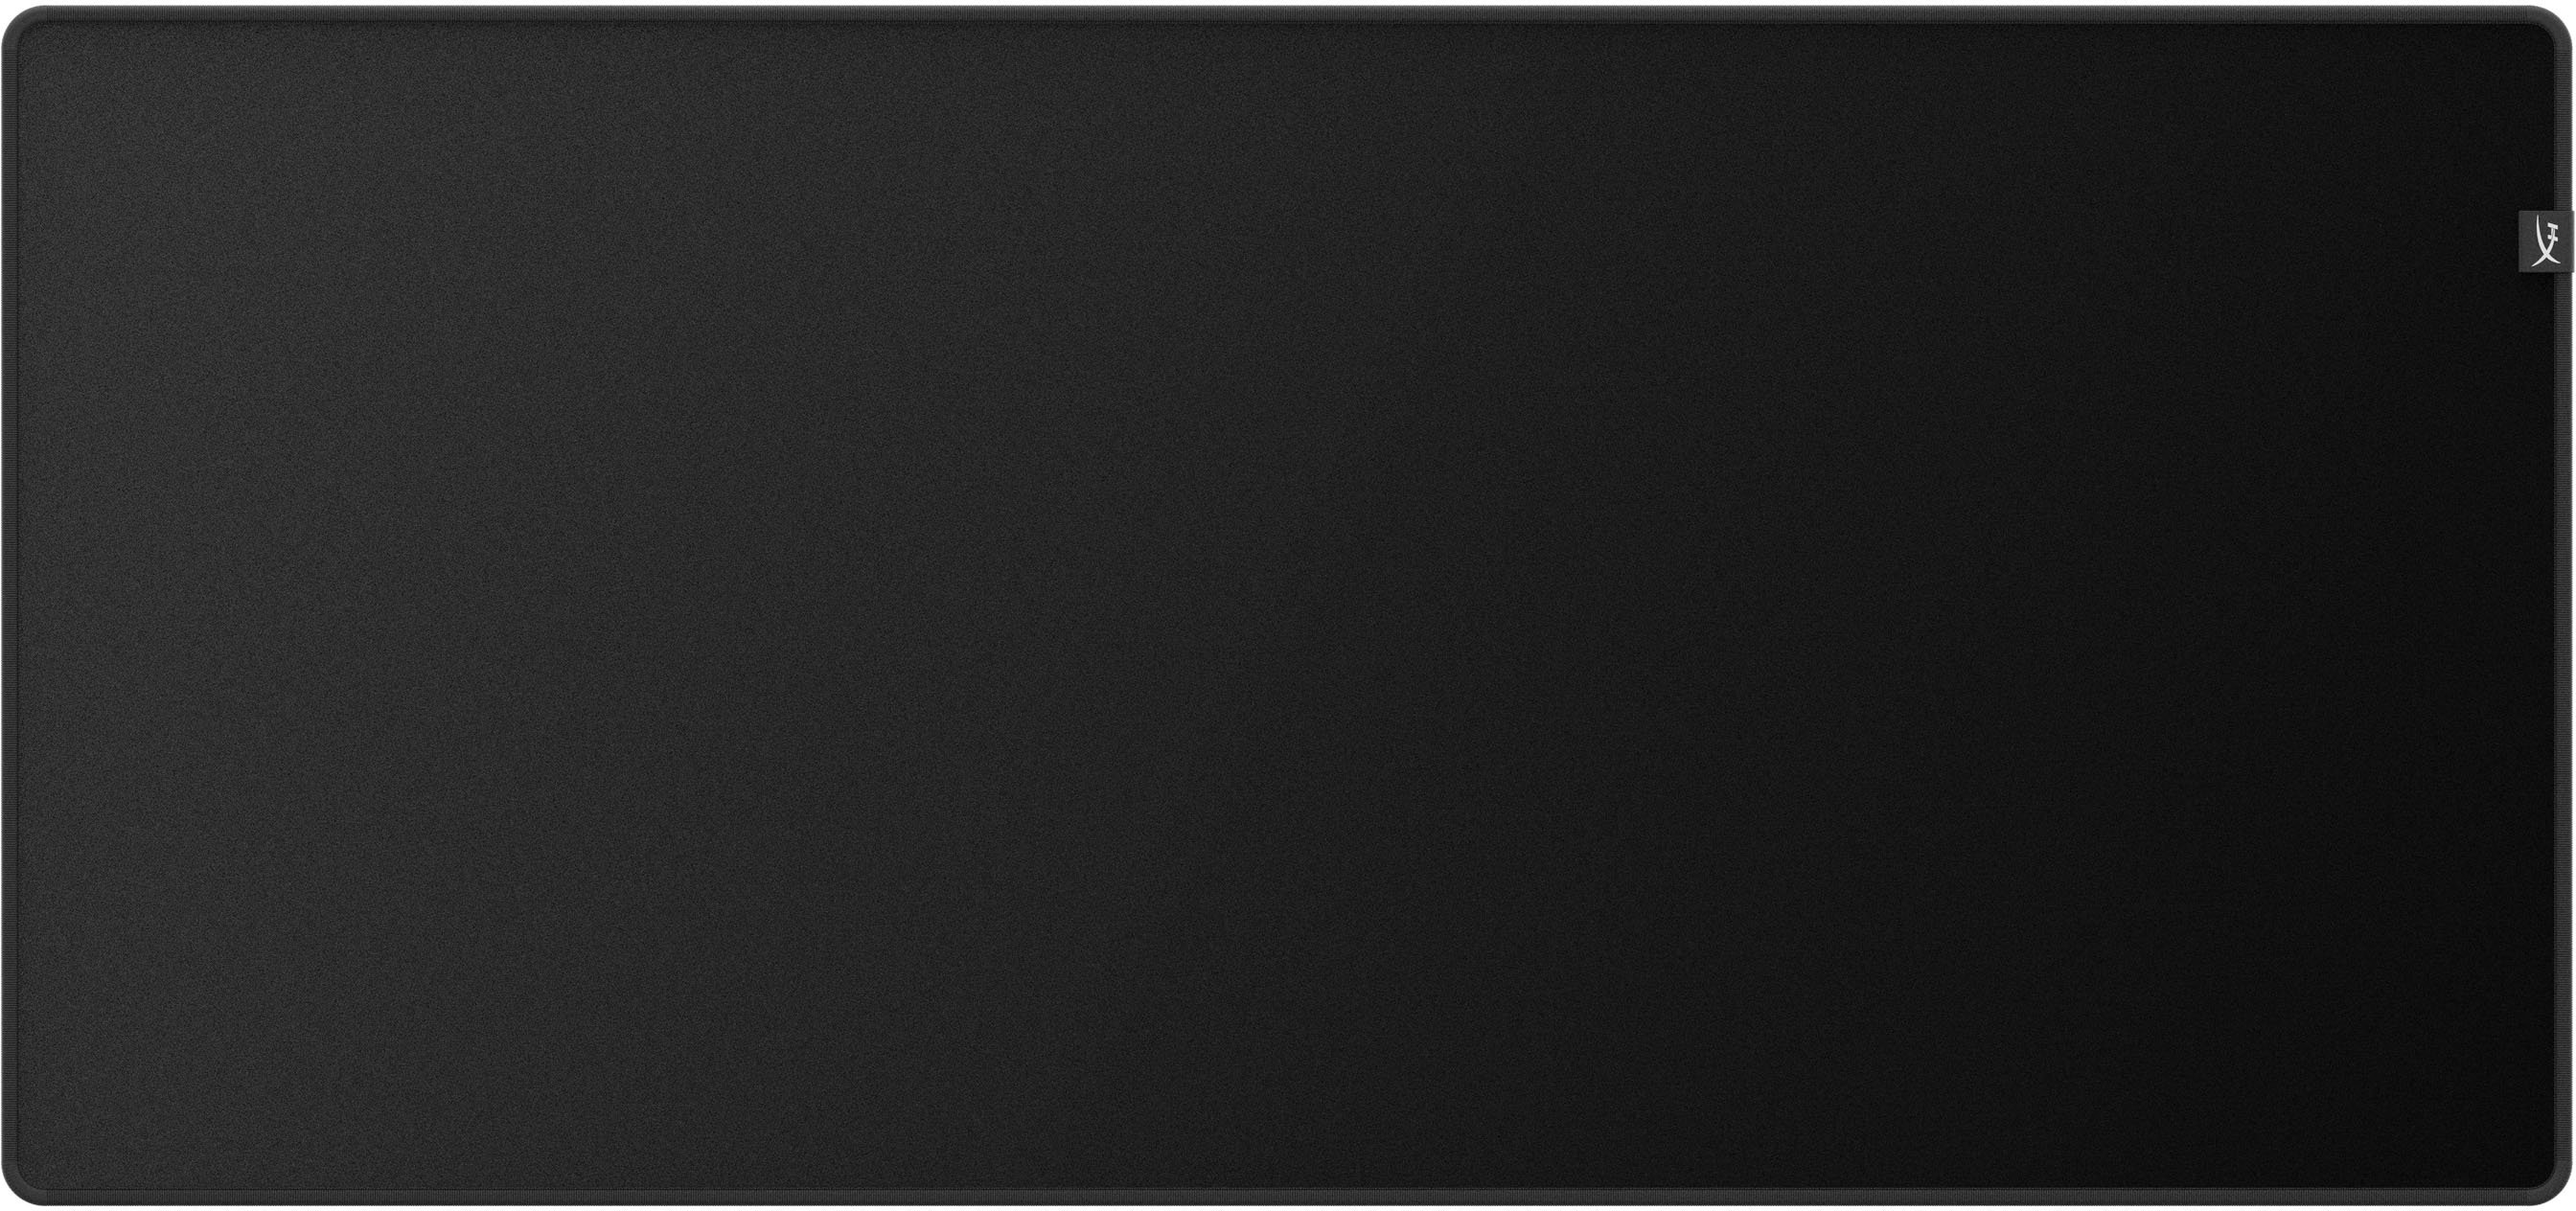 Single Blank White Mouse Pad